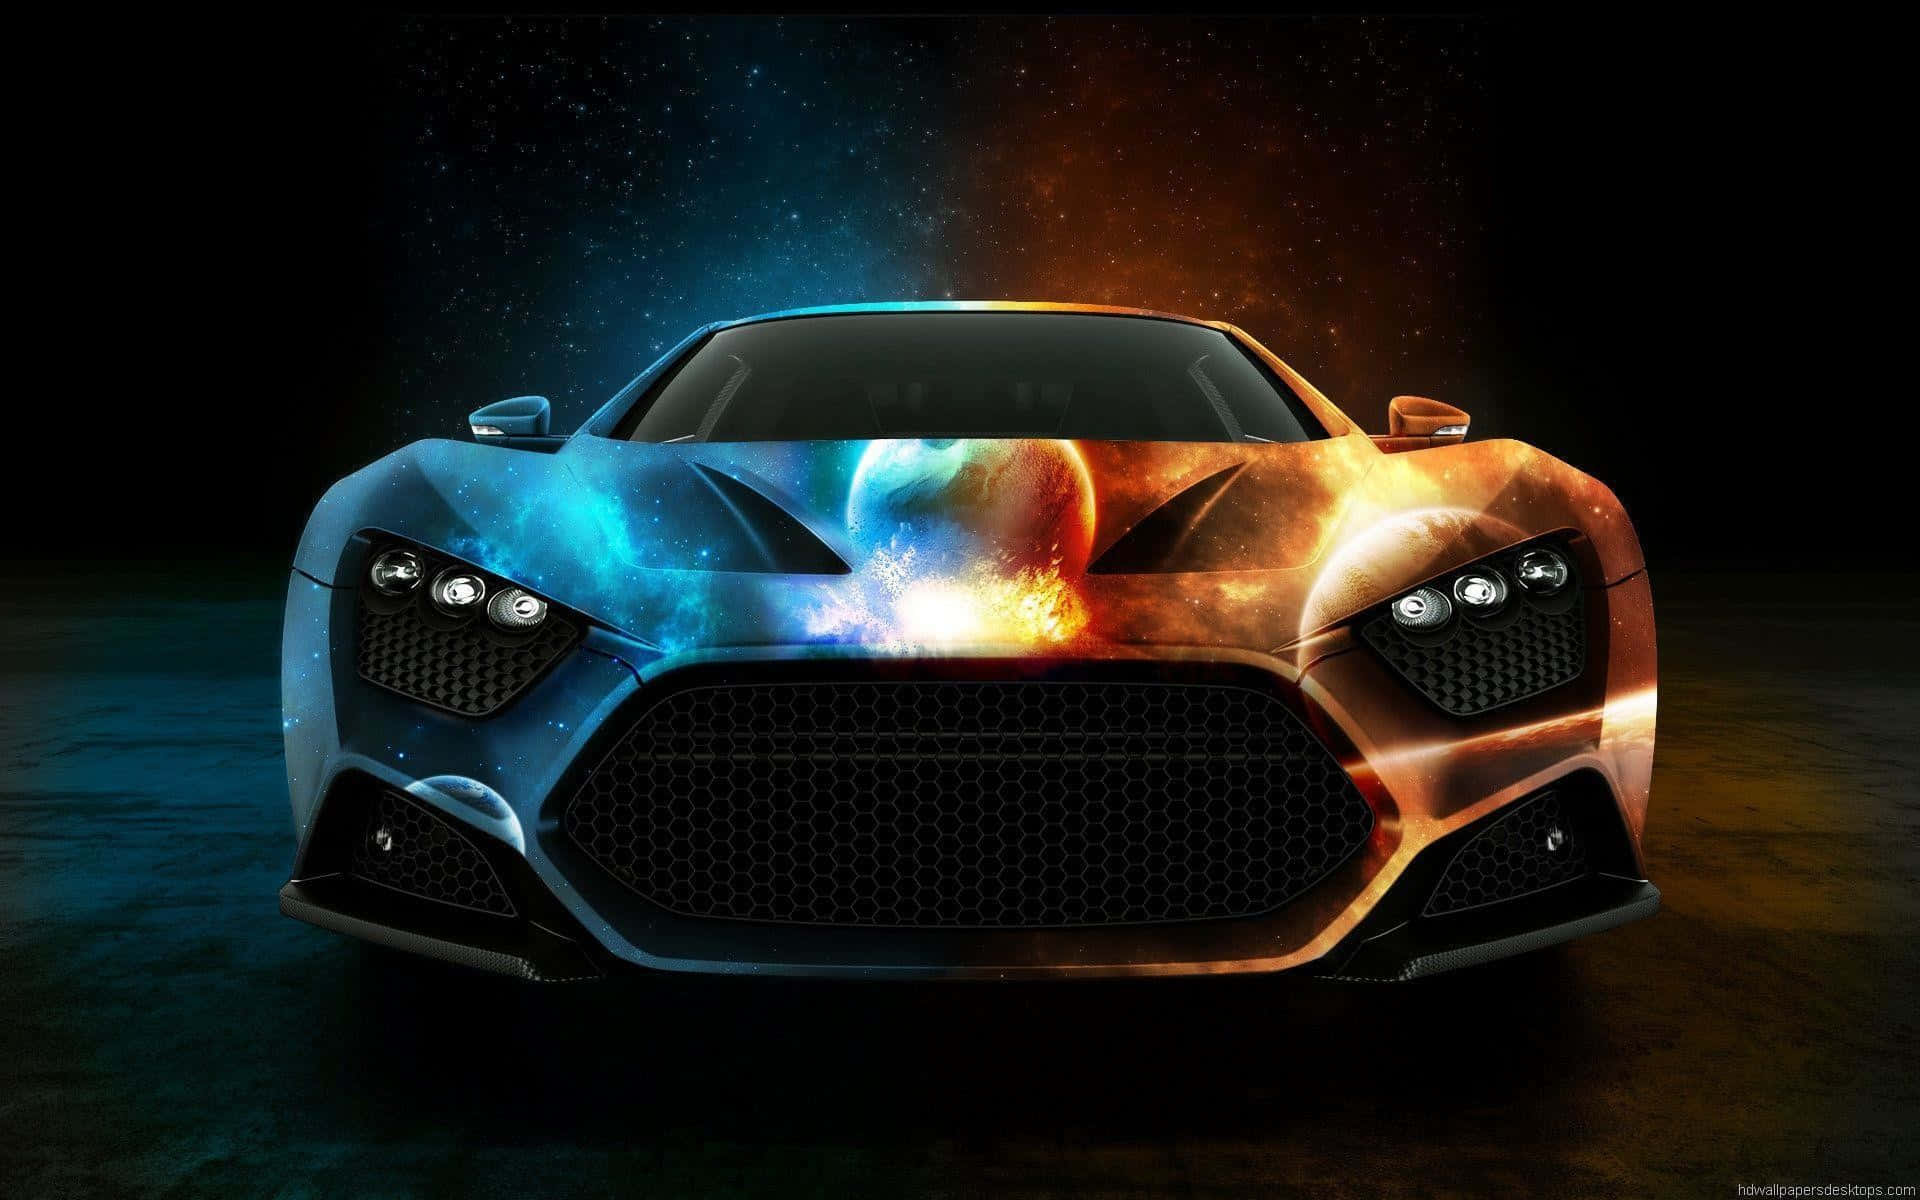 A Sports Car With A Colorful Paint Job